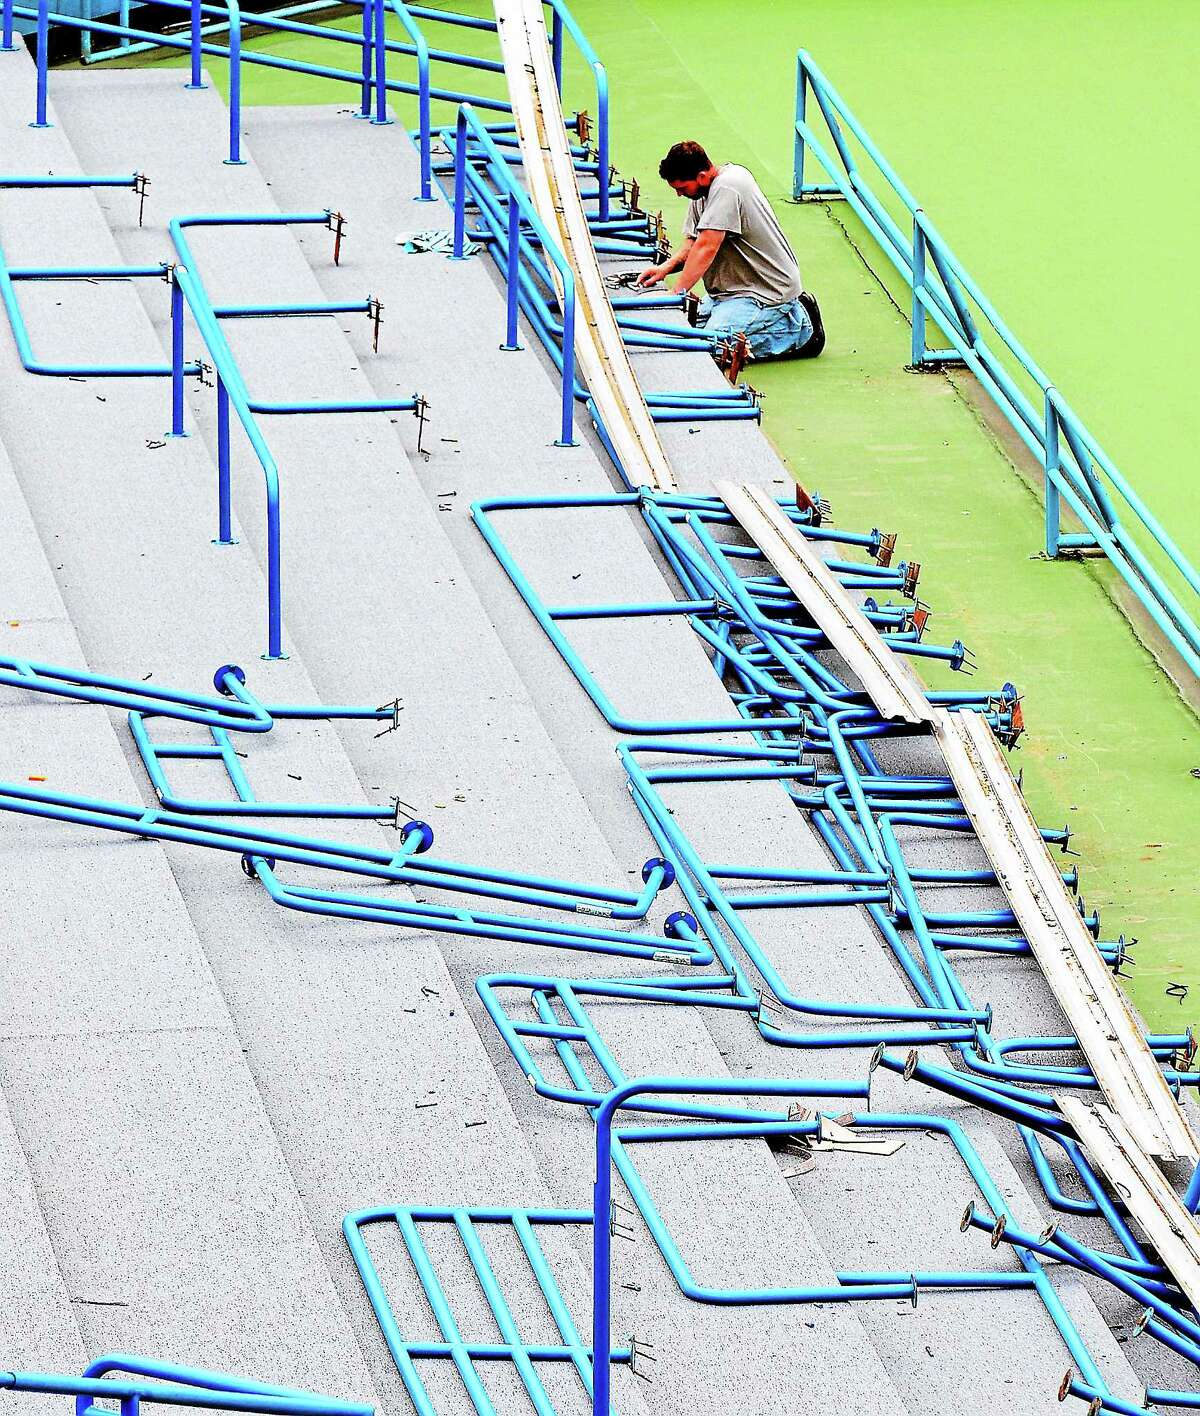 An installer works on railings in the Connecticut Tennis Center stadium court.